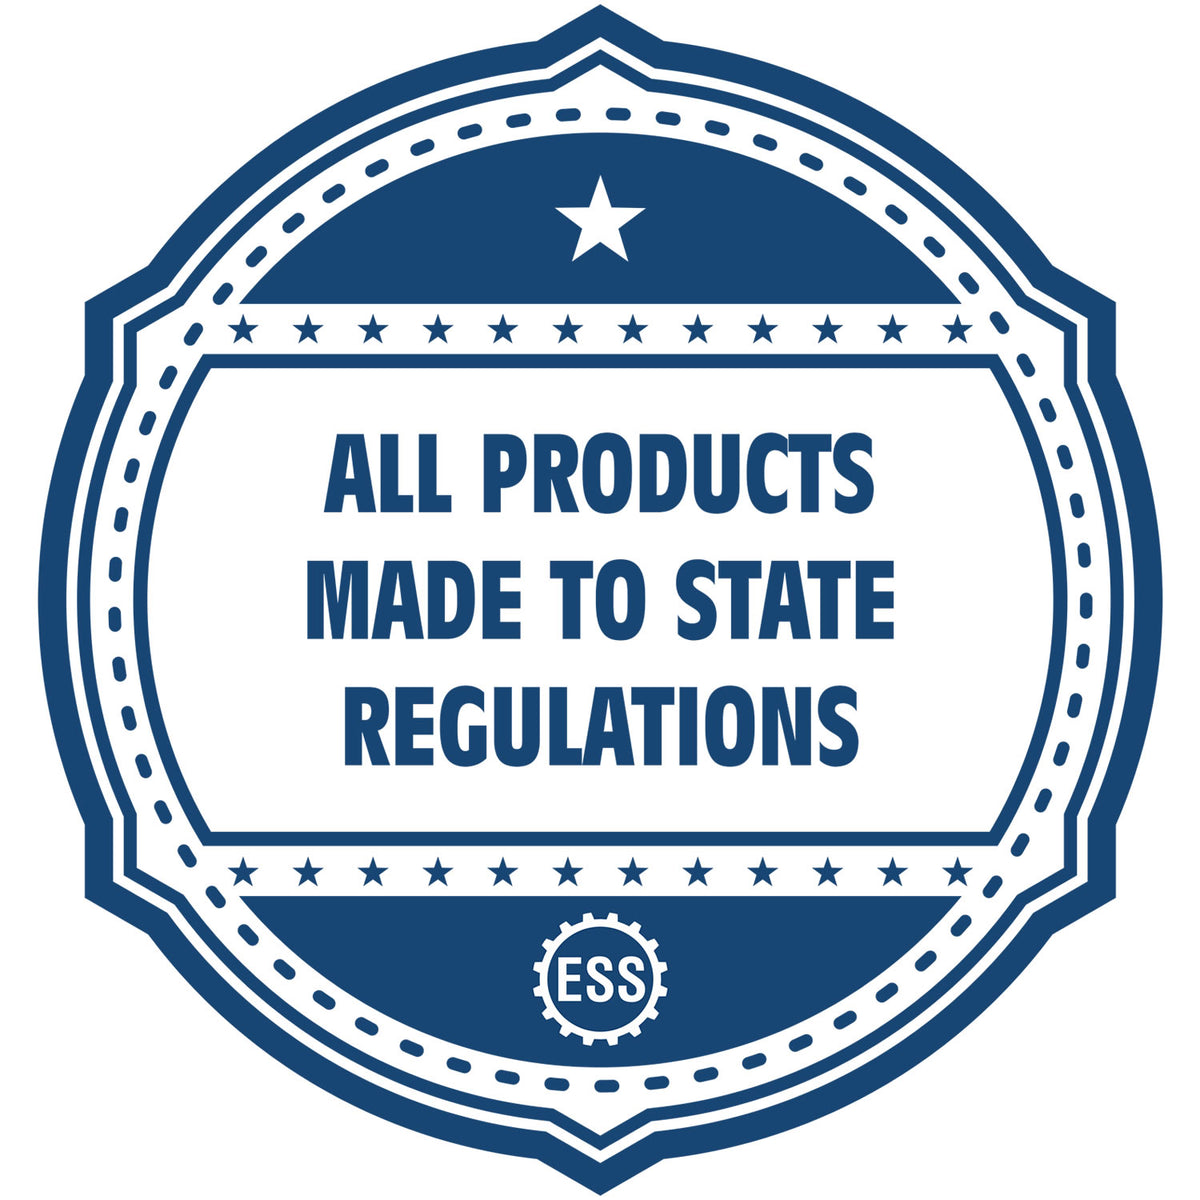 An icon or badge element for the Digital Hawaii PE Stamp and Electronic Seal for Hawaii Engineer showing that this product is made in compliance with state regulations.